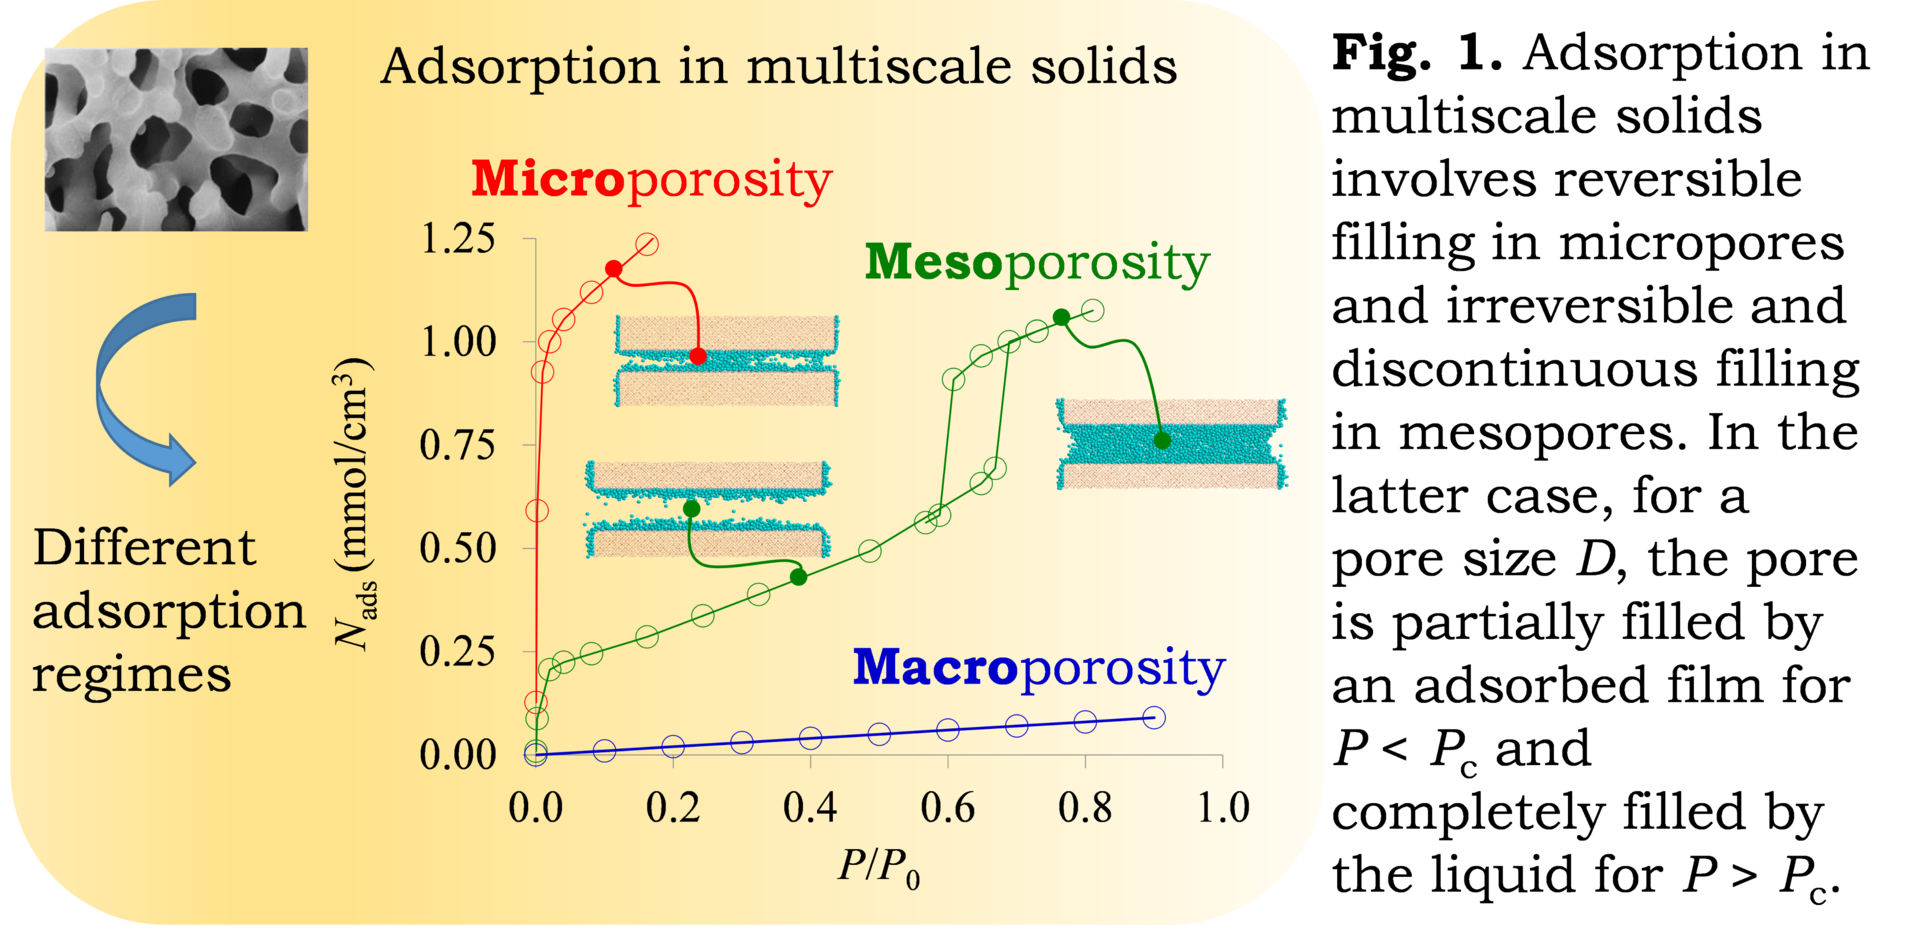 Multiscale solid in upper, left angle and arrow below it pointing to a plot of a different adsorption regimes. The plot distinguishes between micro-, meso-, and macroporosity. 